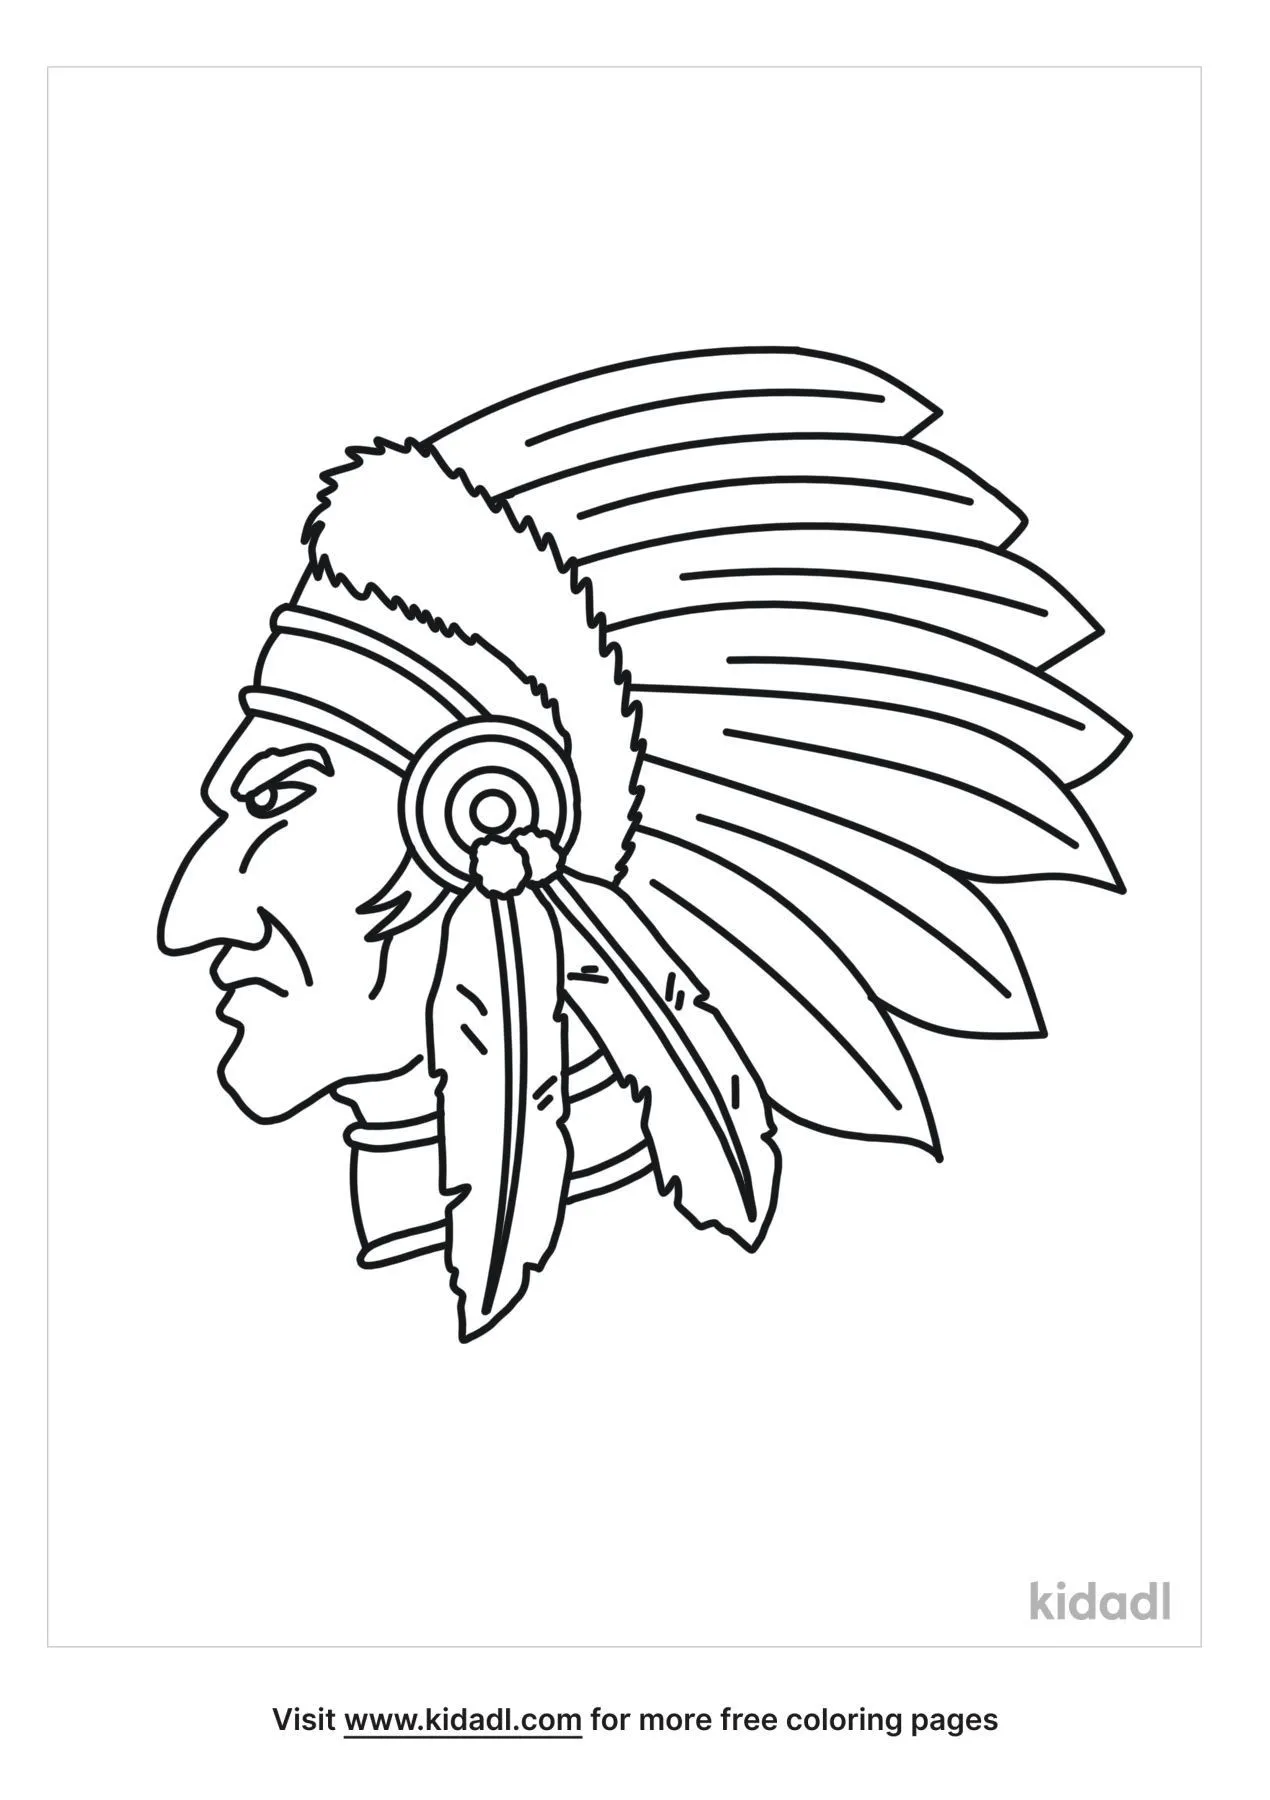 Apache Indian Coloring Page